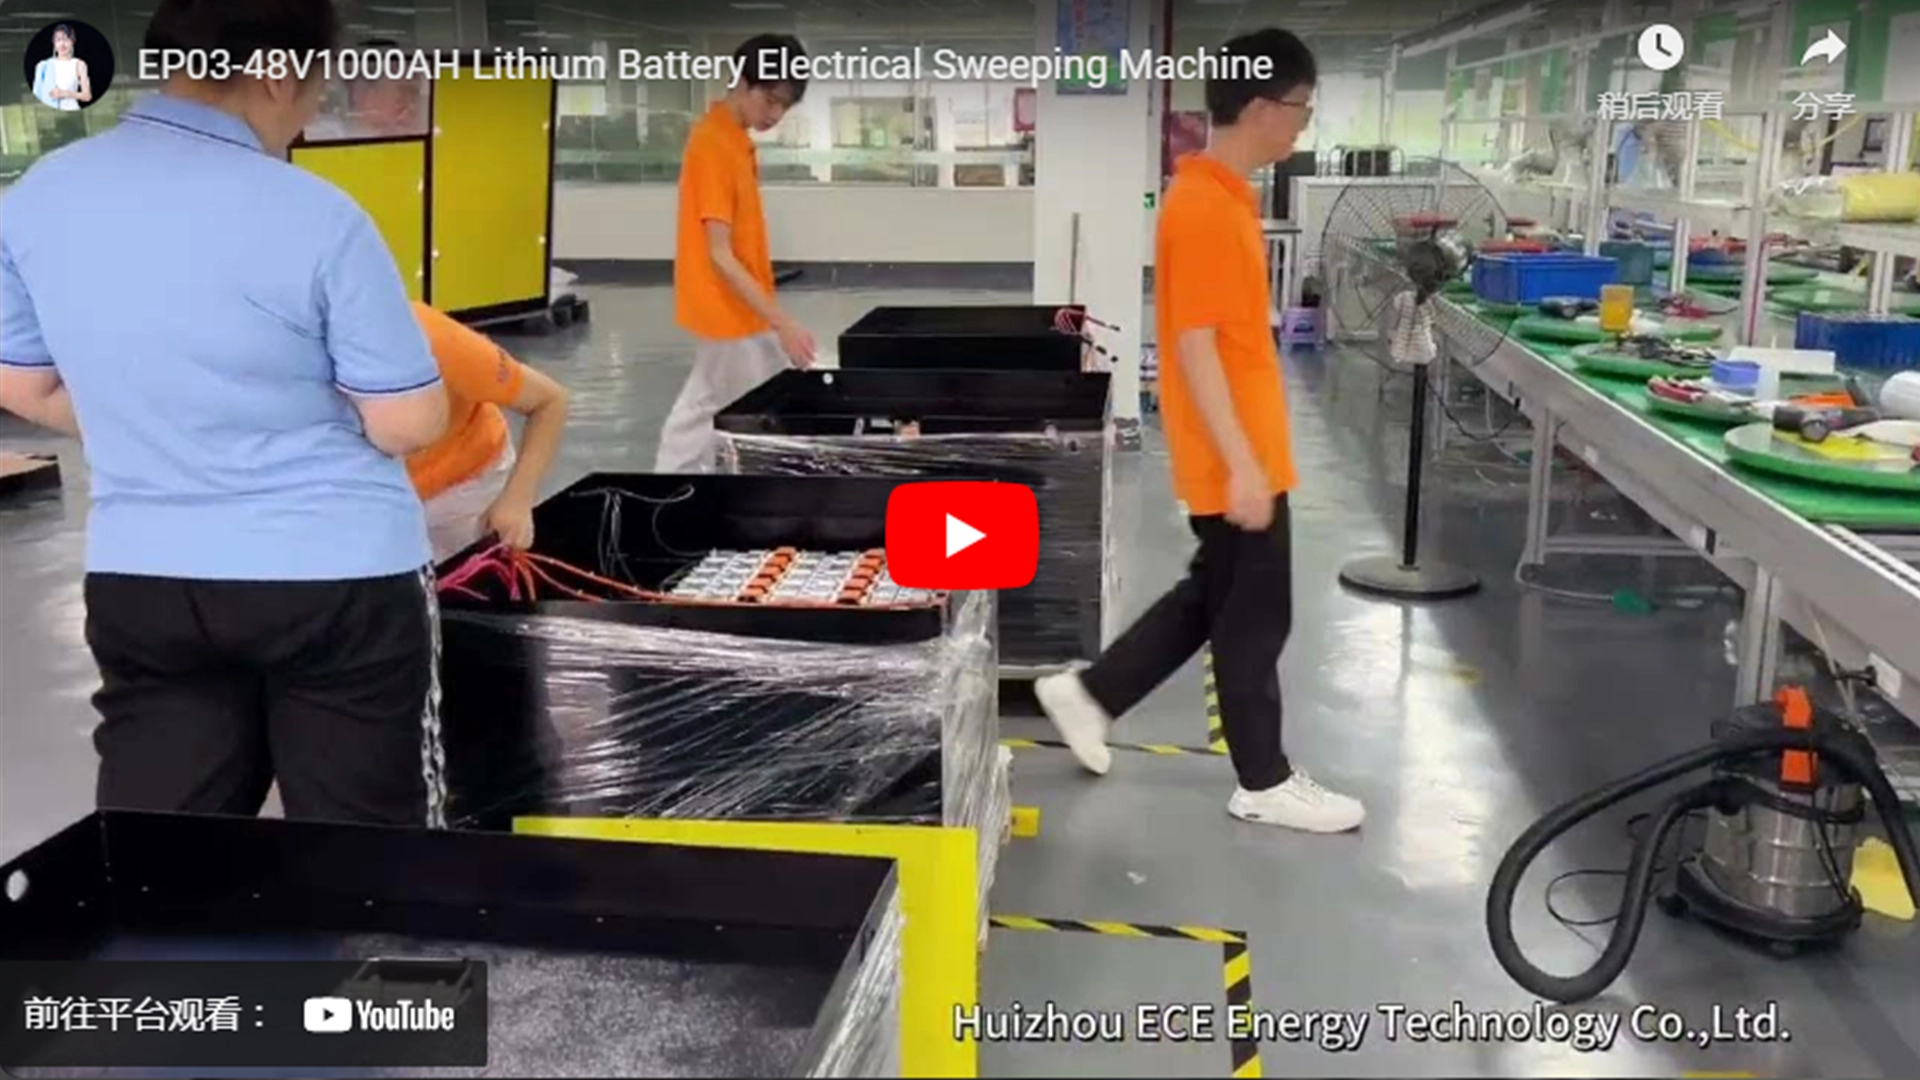 EP03-48V1000AH Lithium Battery Electrical Sweeping Machine